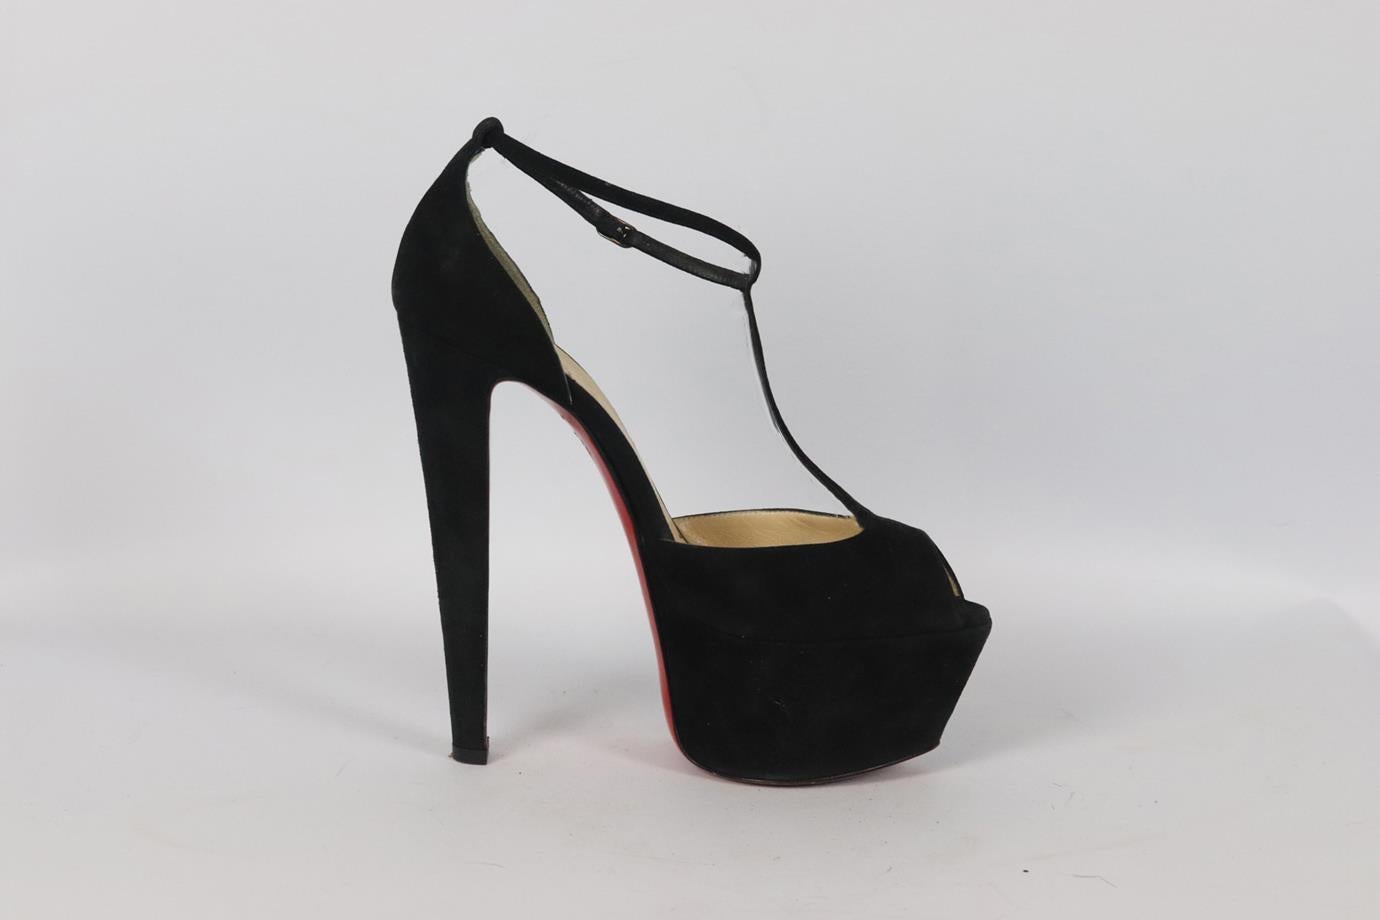 Christian Louboutin suede platform sandals. Black. Buckle fastening at side. Does not come with dustbag or box. Size: EU 39 (UK 6, US 9). Insole: 9.5 in. Heel height: 5.5 in. Platform: 2.1 in. Good condition - Some wear to soles and upper material;